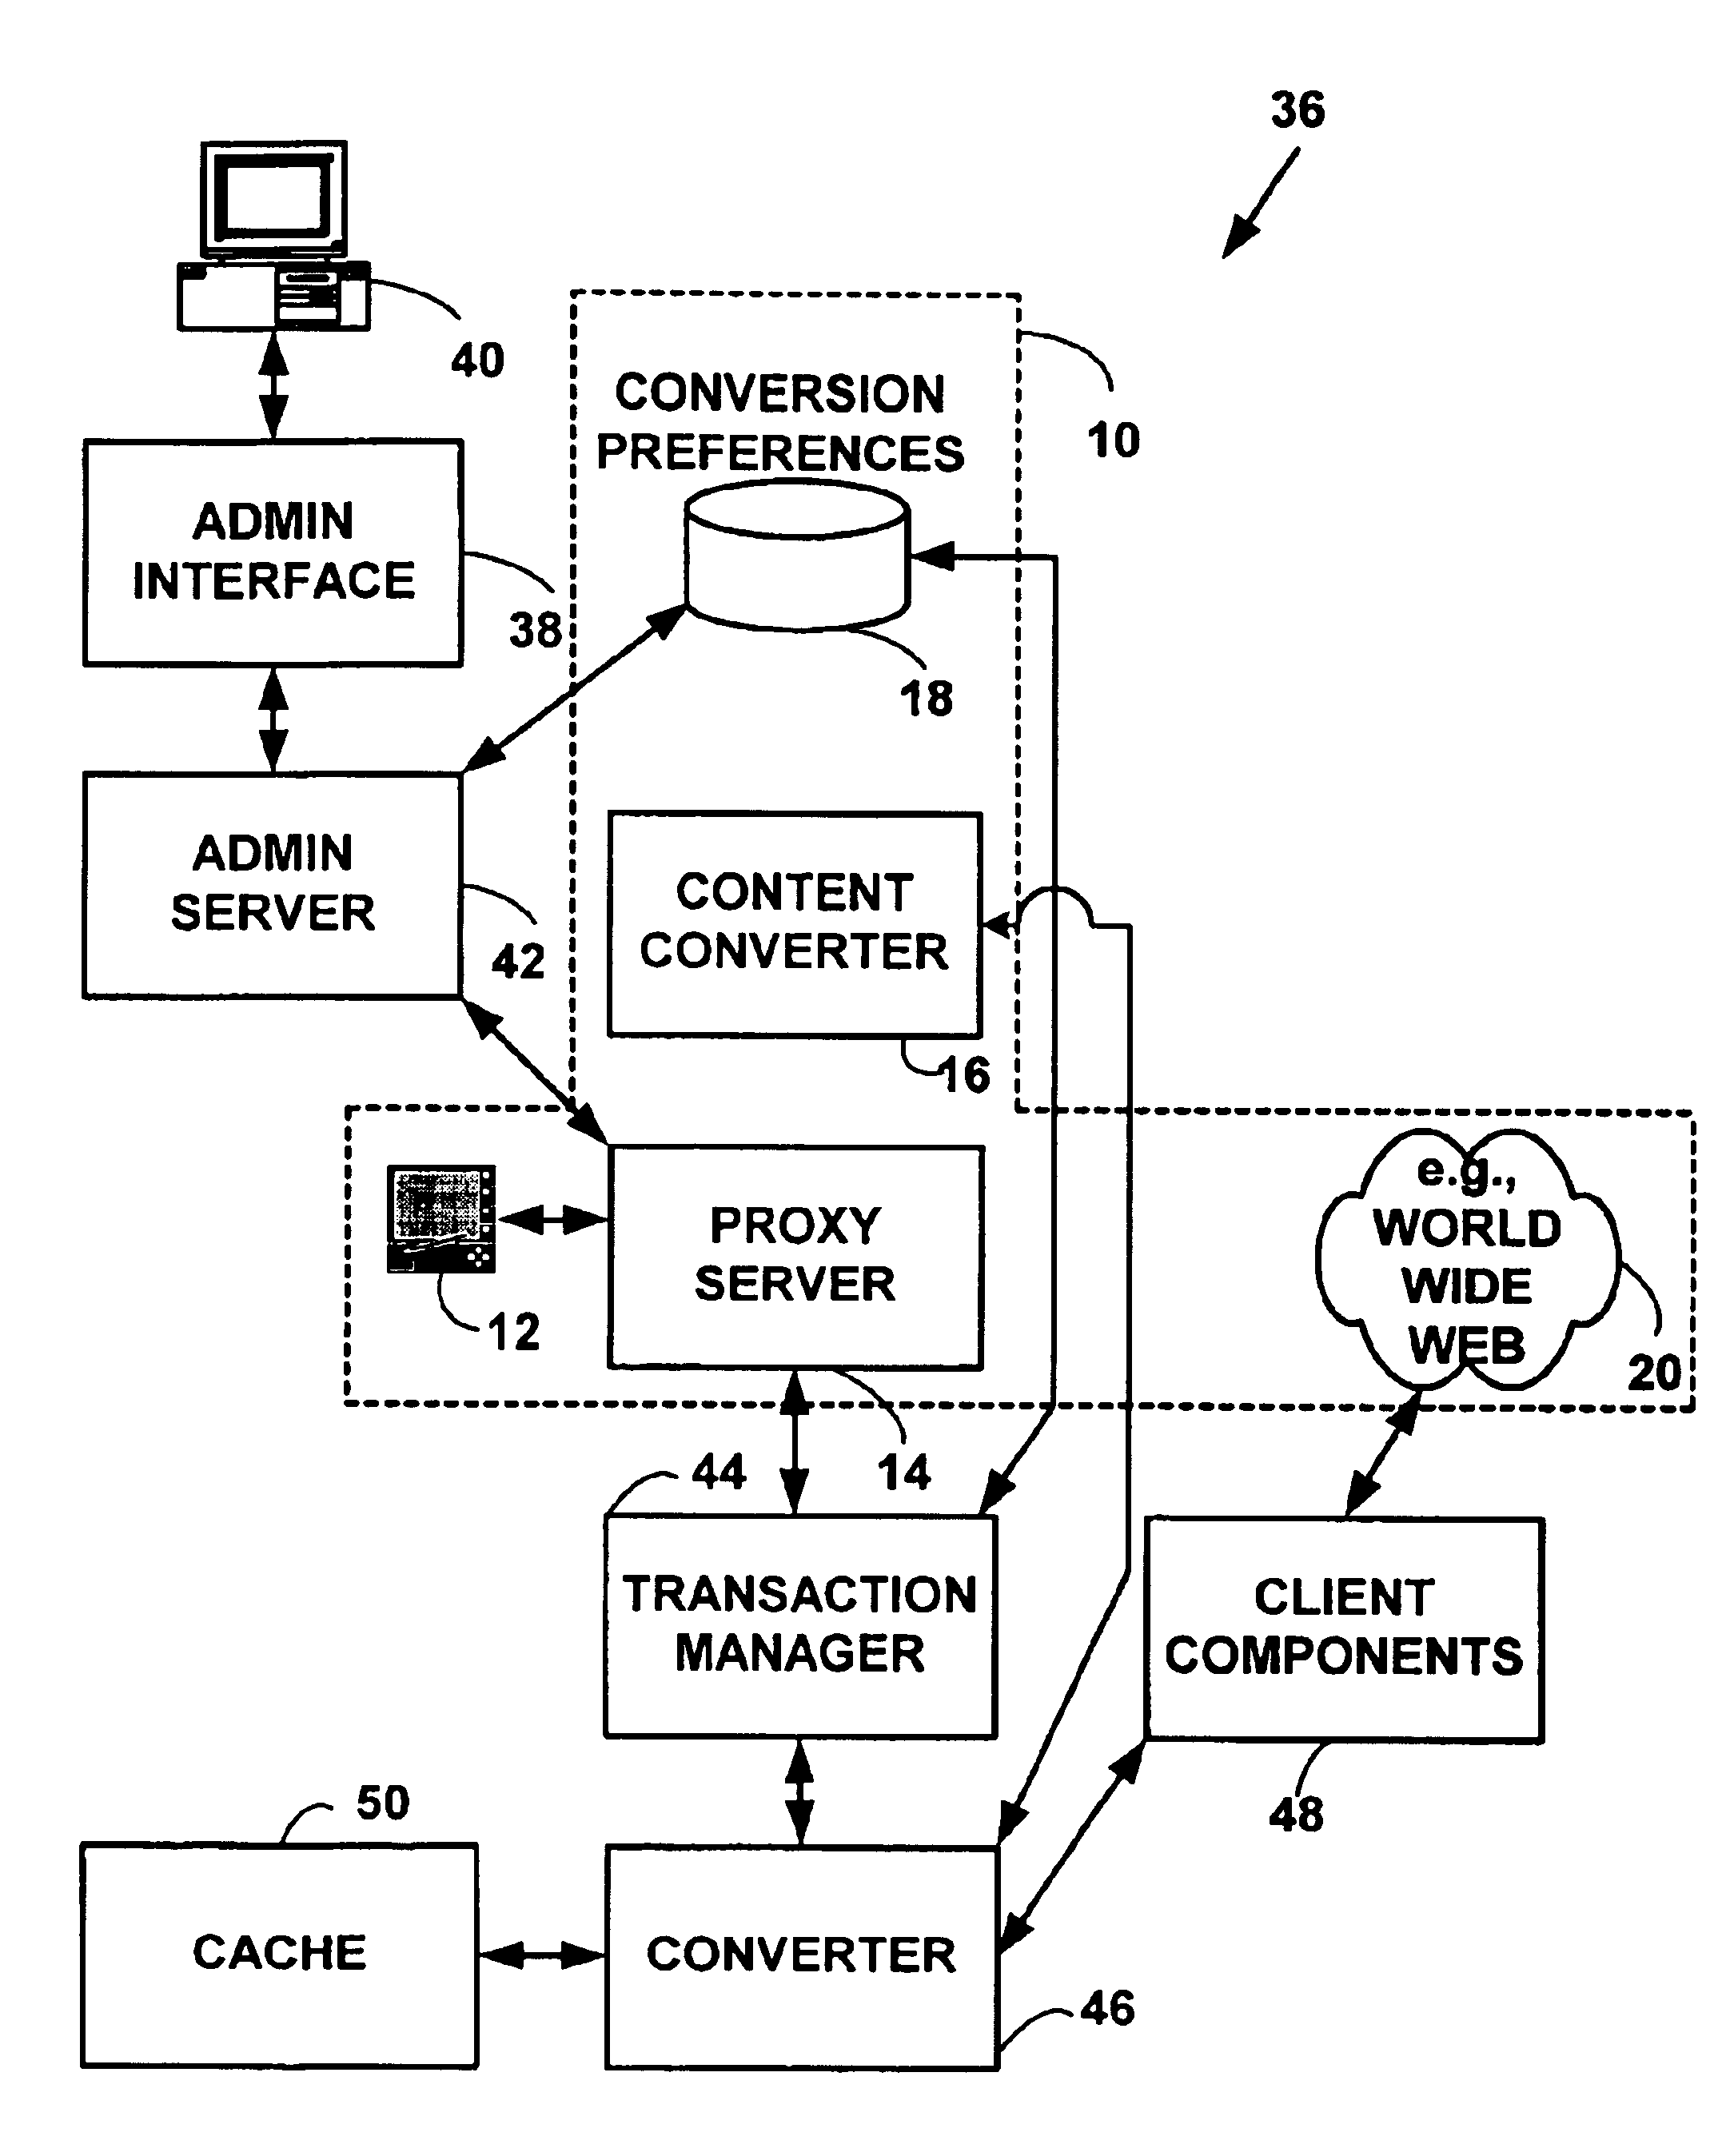 Method and system for content conversion of hypertext data using data mining